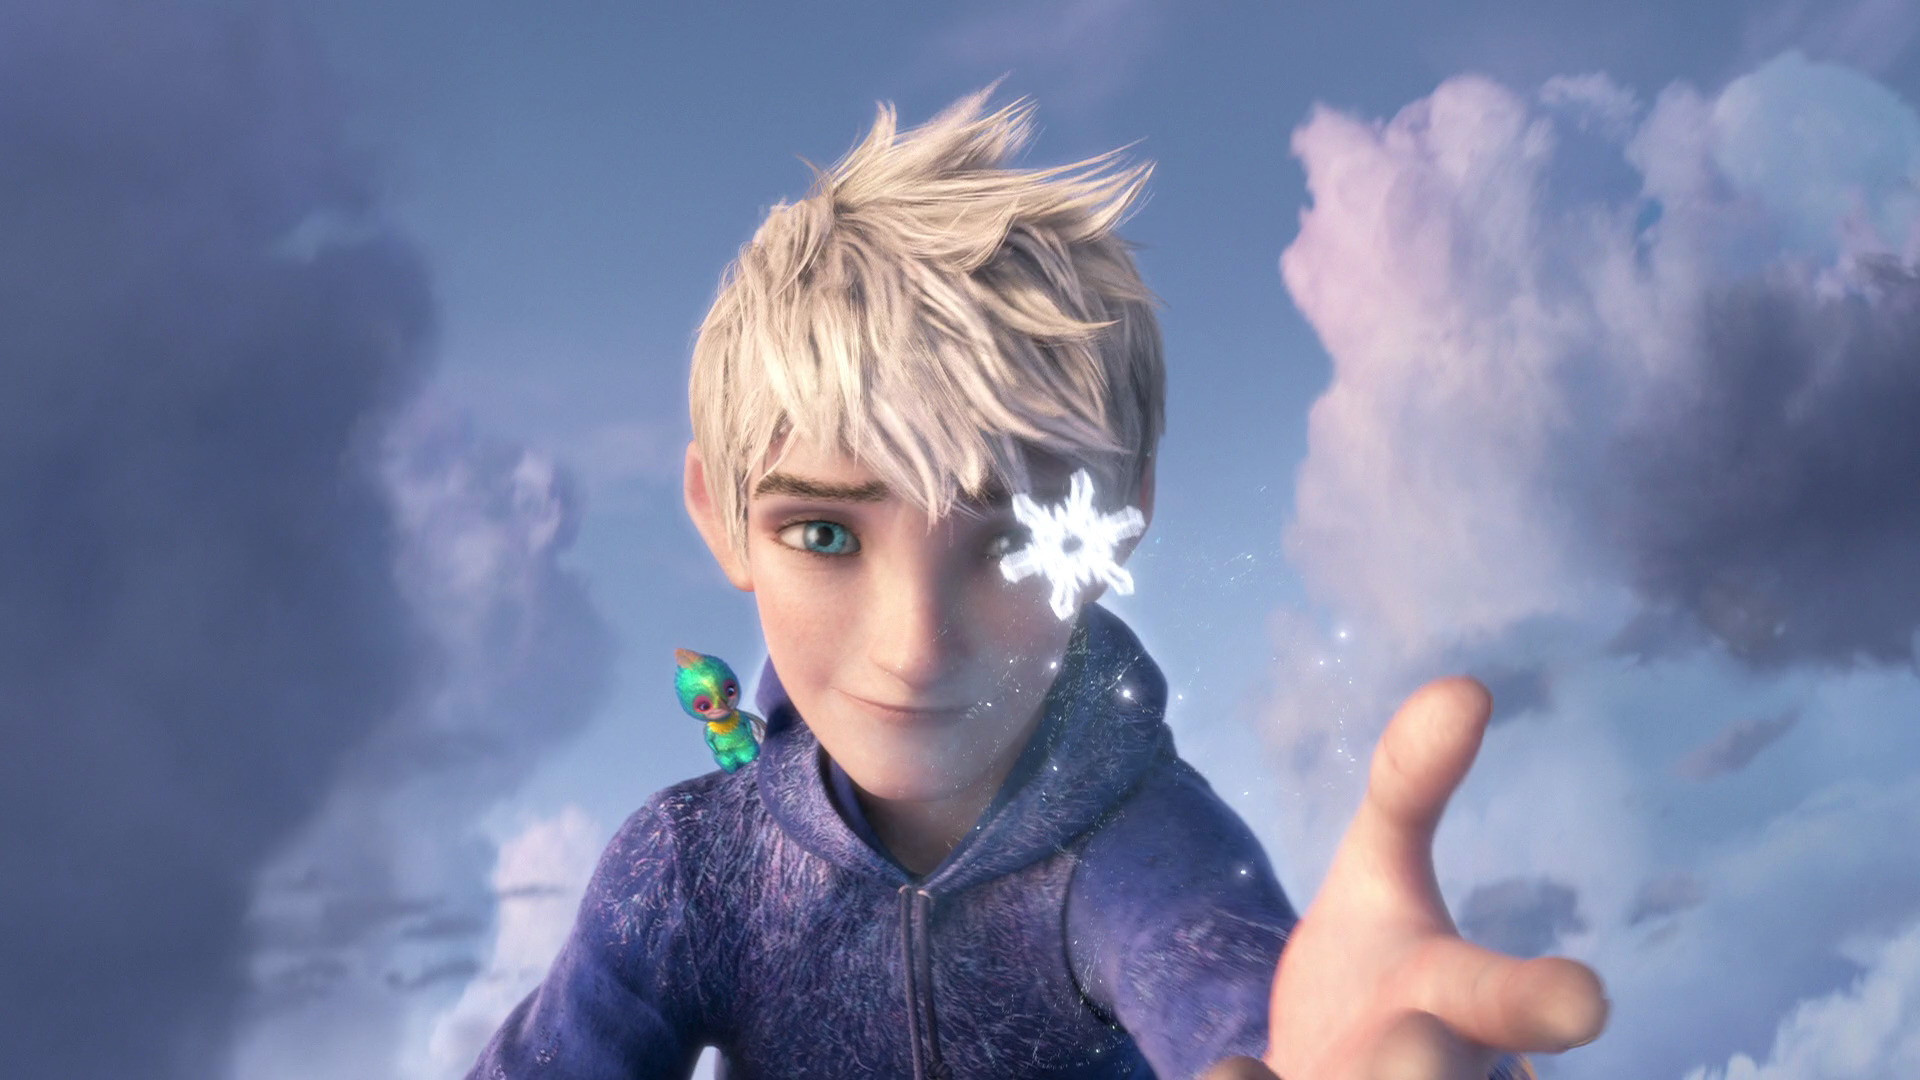 1920x1080 Rise of the Guardians Photo: Jack Frost HQ.